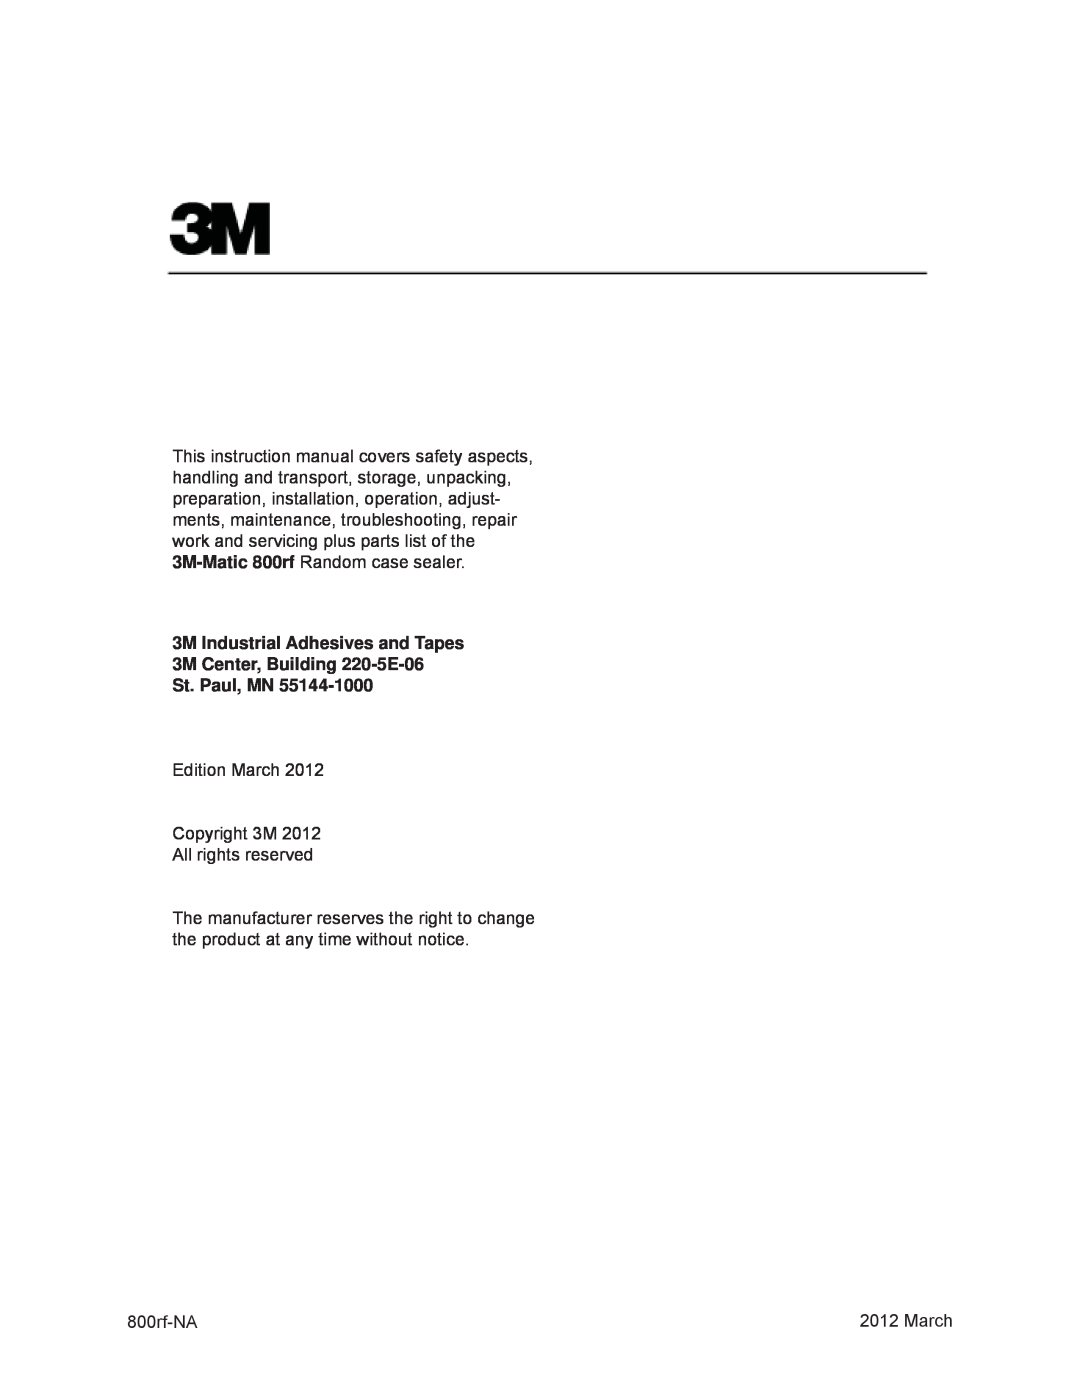 3M 40800, 800rf manual 3M Industrial Adhesives and Tapes 3M Center, Building 220-5E-06, St. Paul, MN 